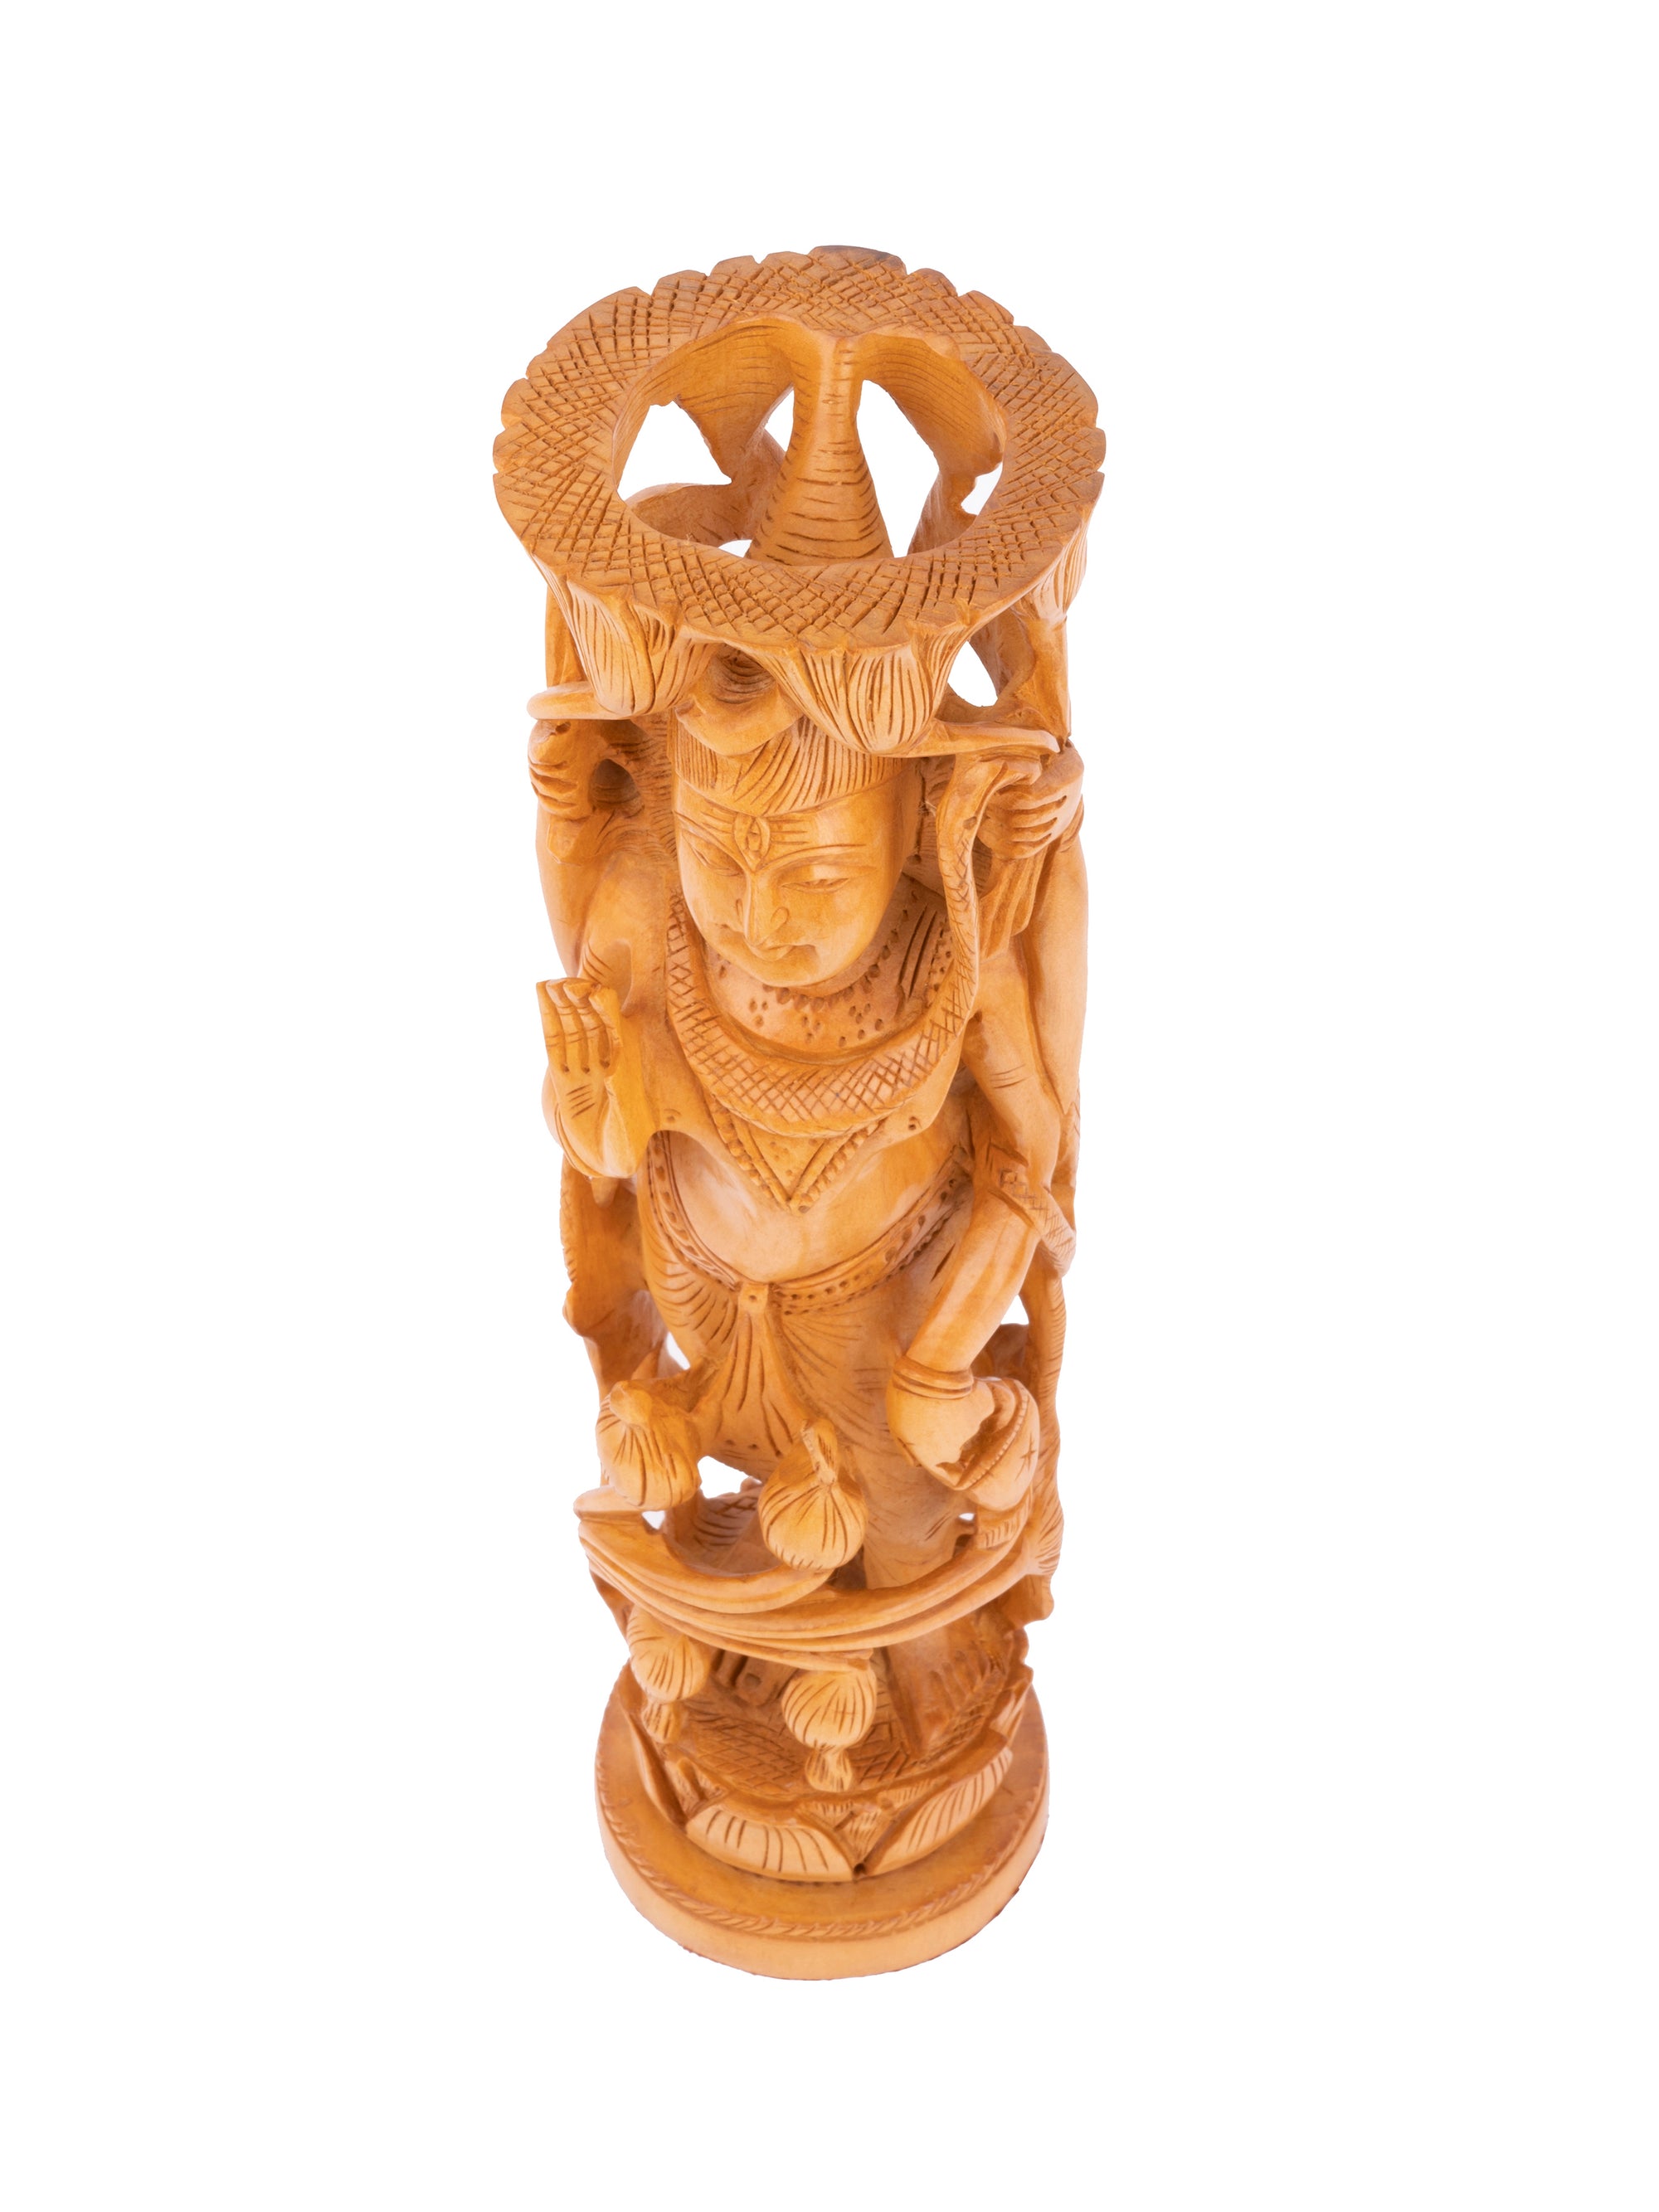 Kadam wood carved Lord Shiva statue - 12 inches height - The Heritage Artifacts